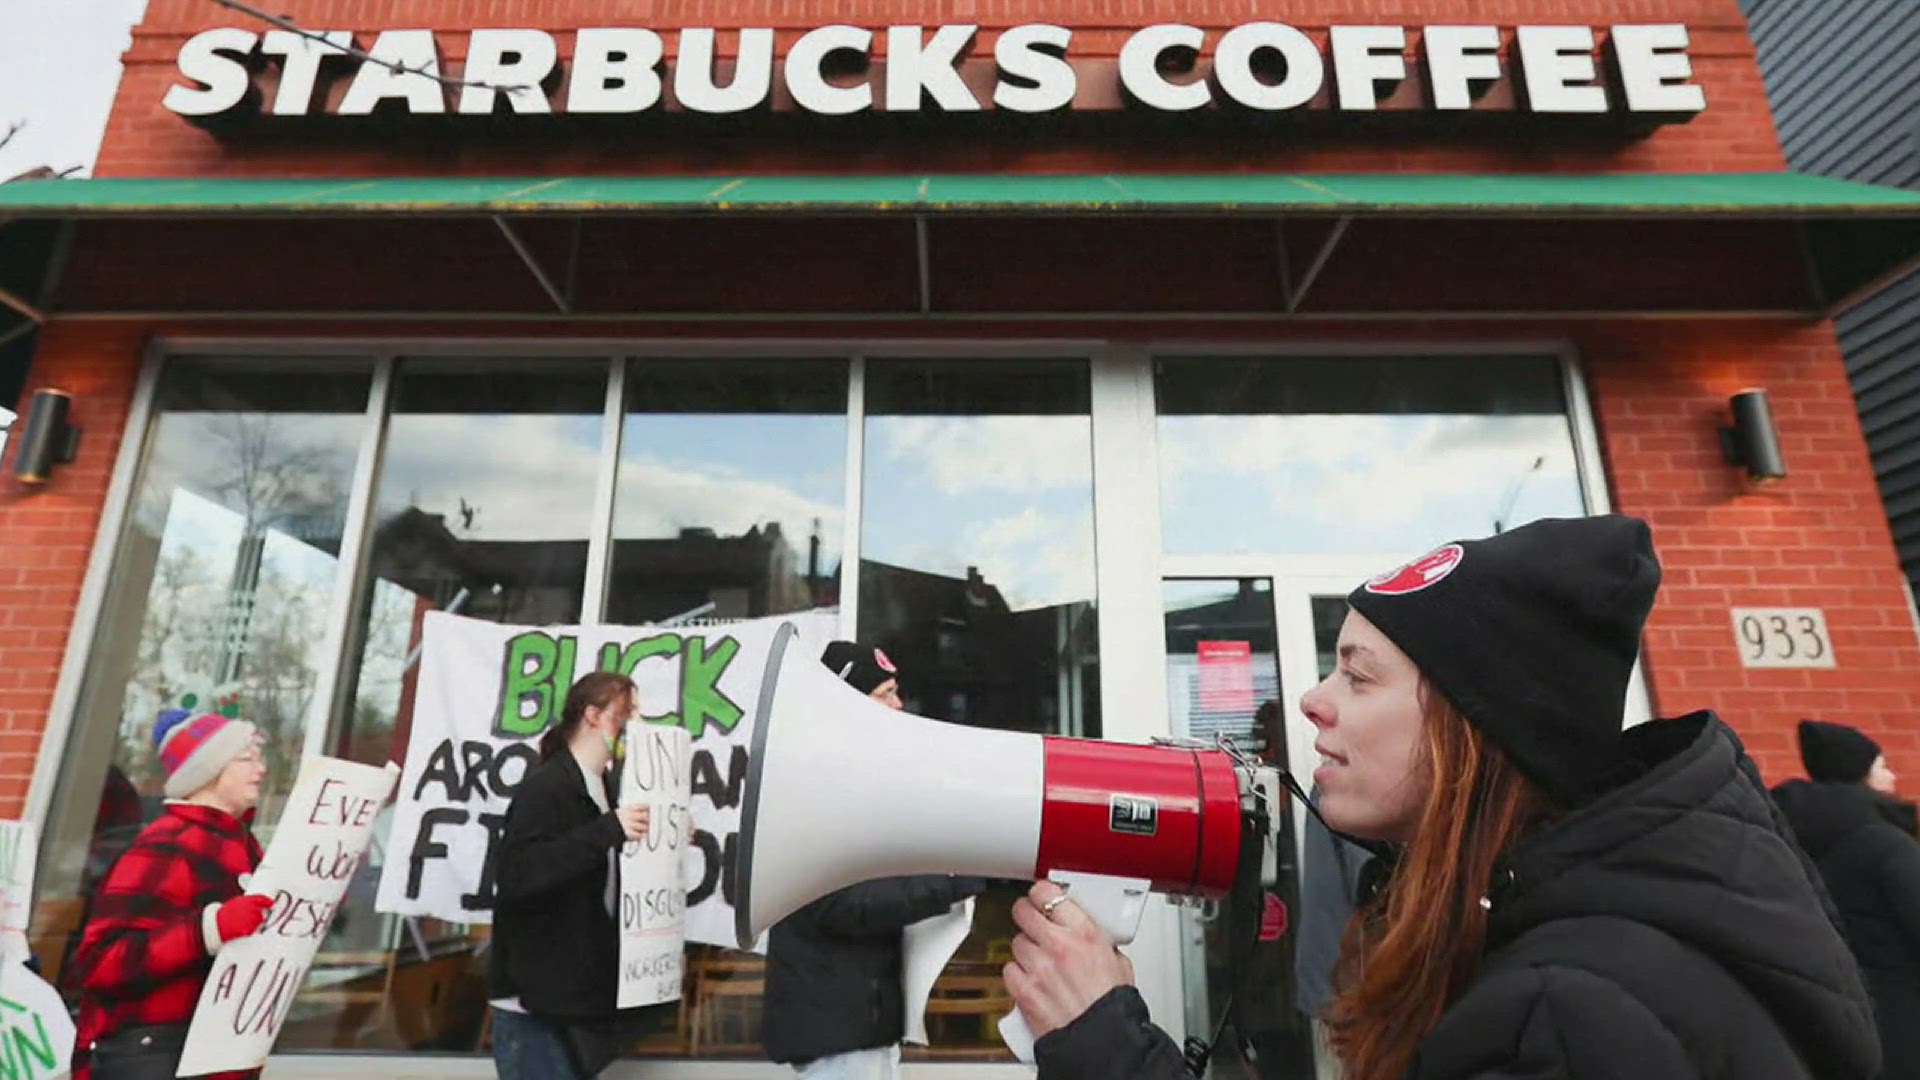 The labor dispute began in February 2022, when Starbucks fired seven workers who were trying to unionize their Tennessee store.